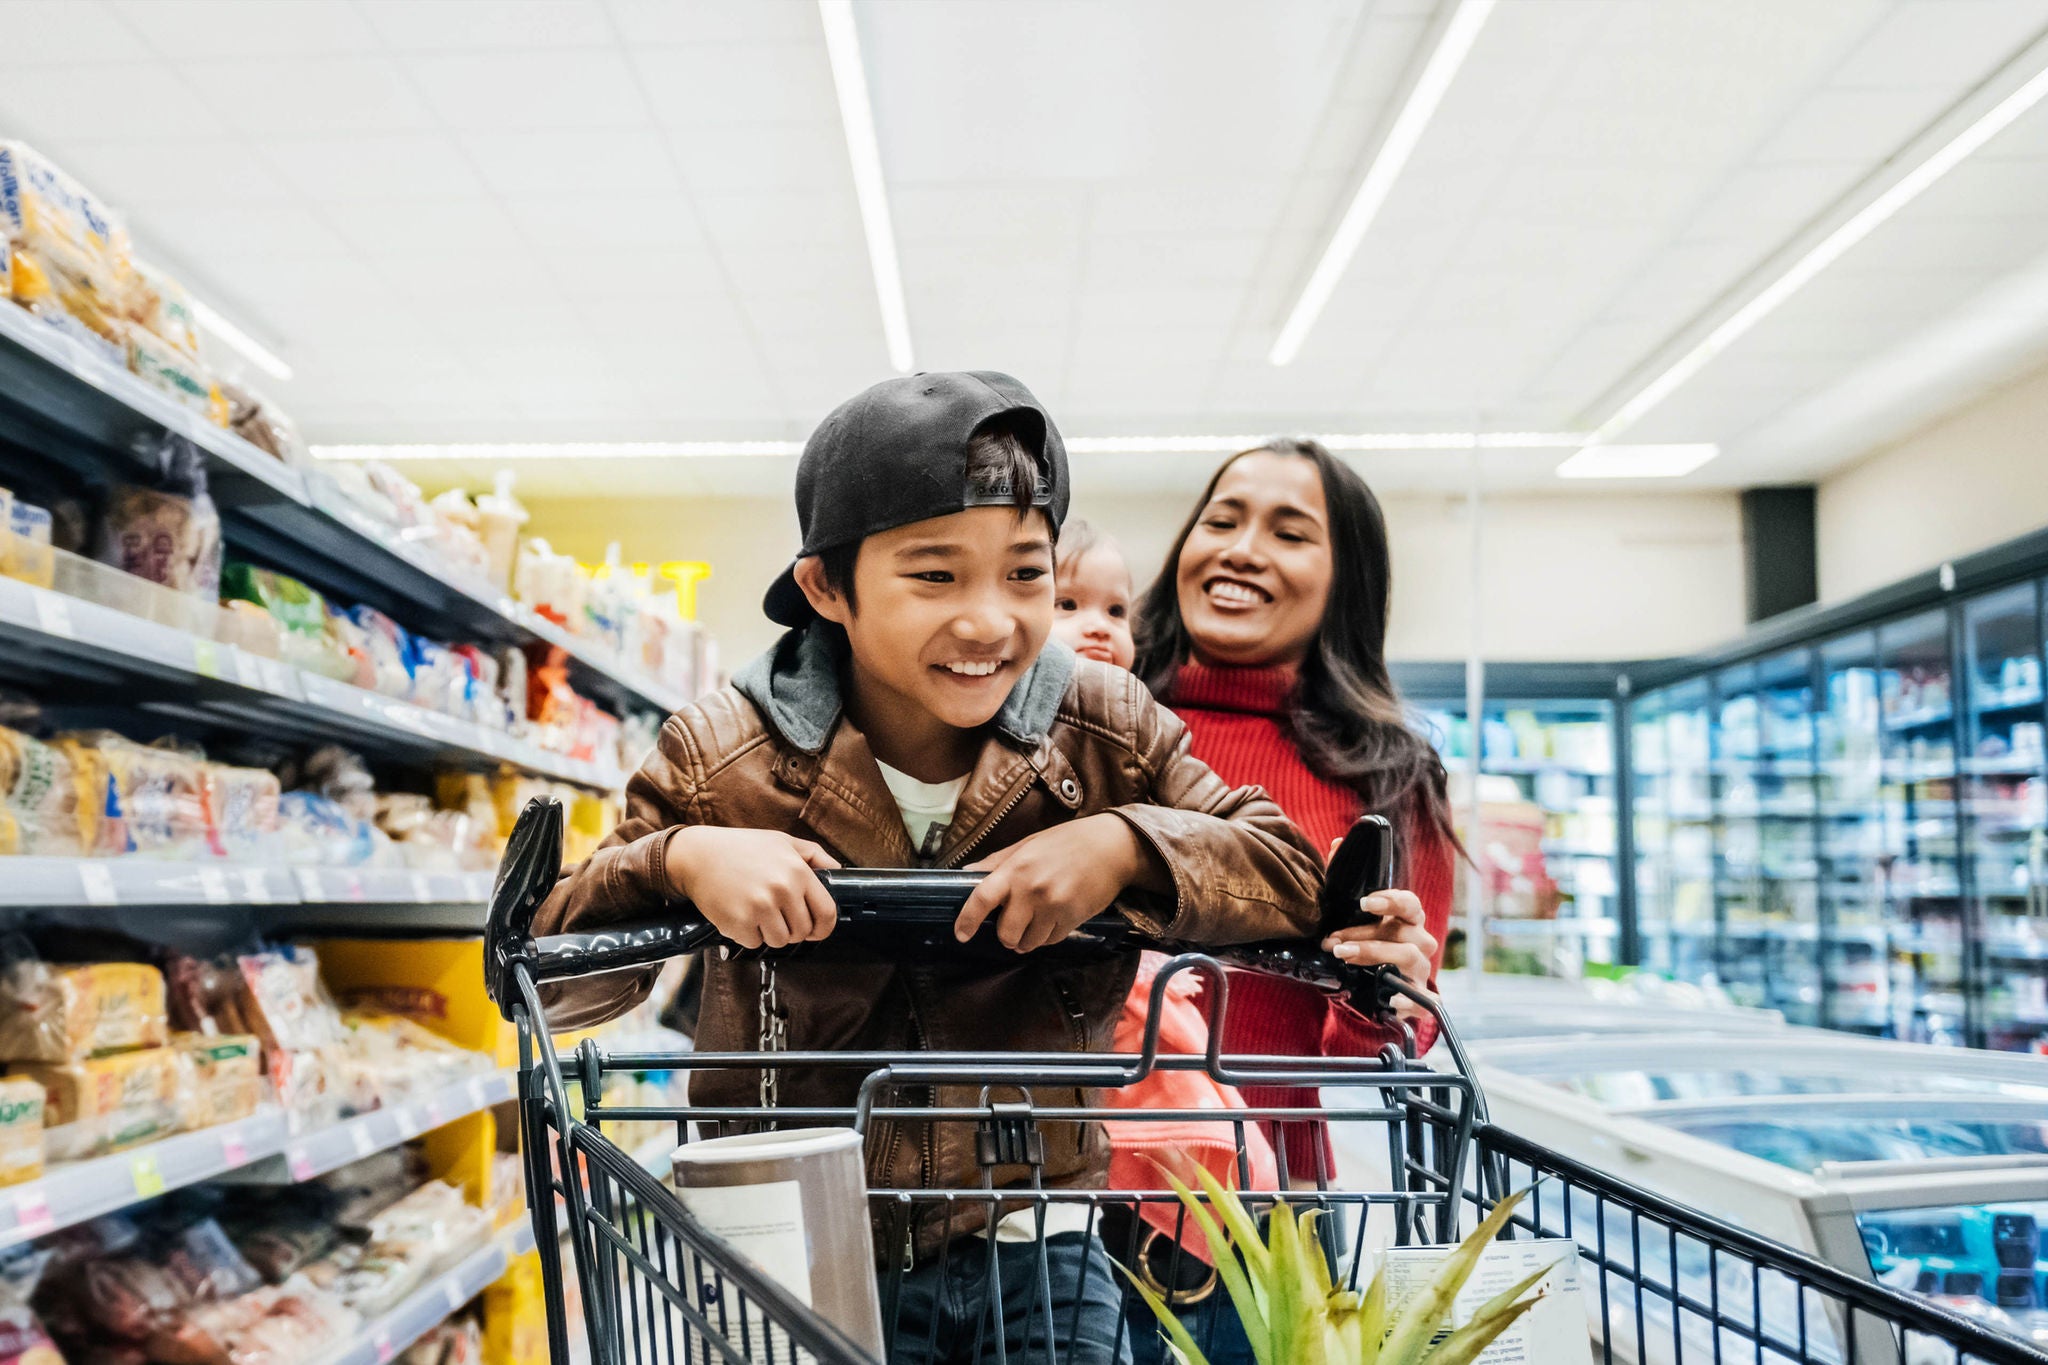 A young boy having fun on a shopping cart while out buying groceries with his family.